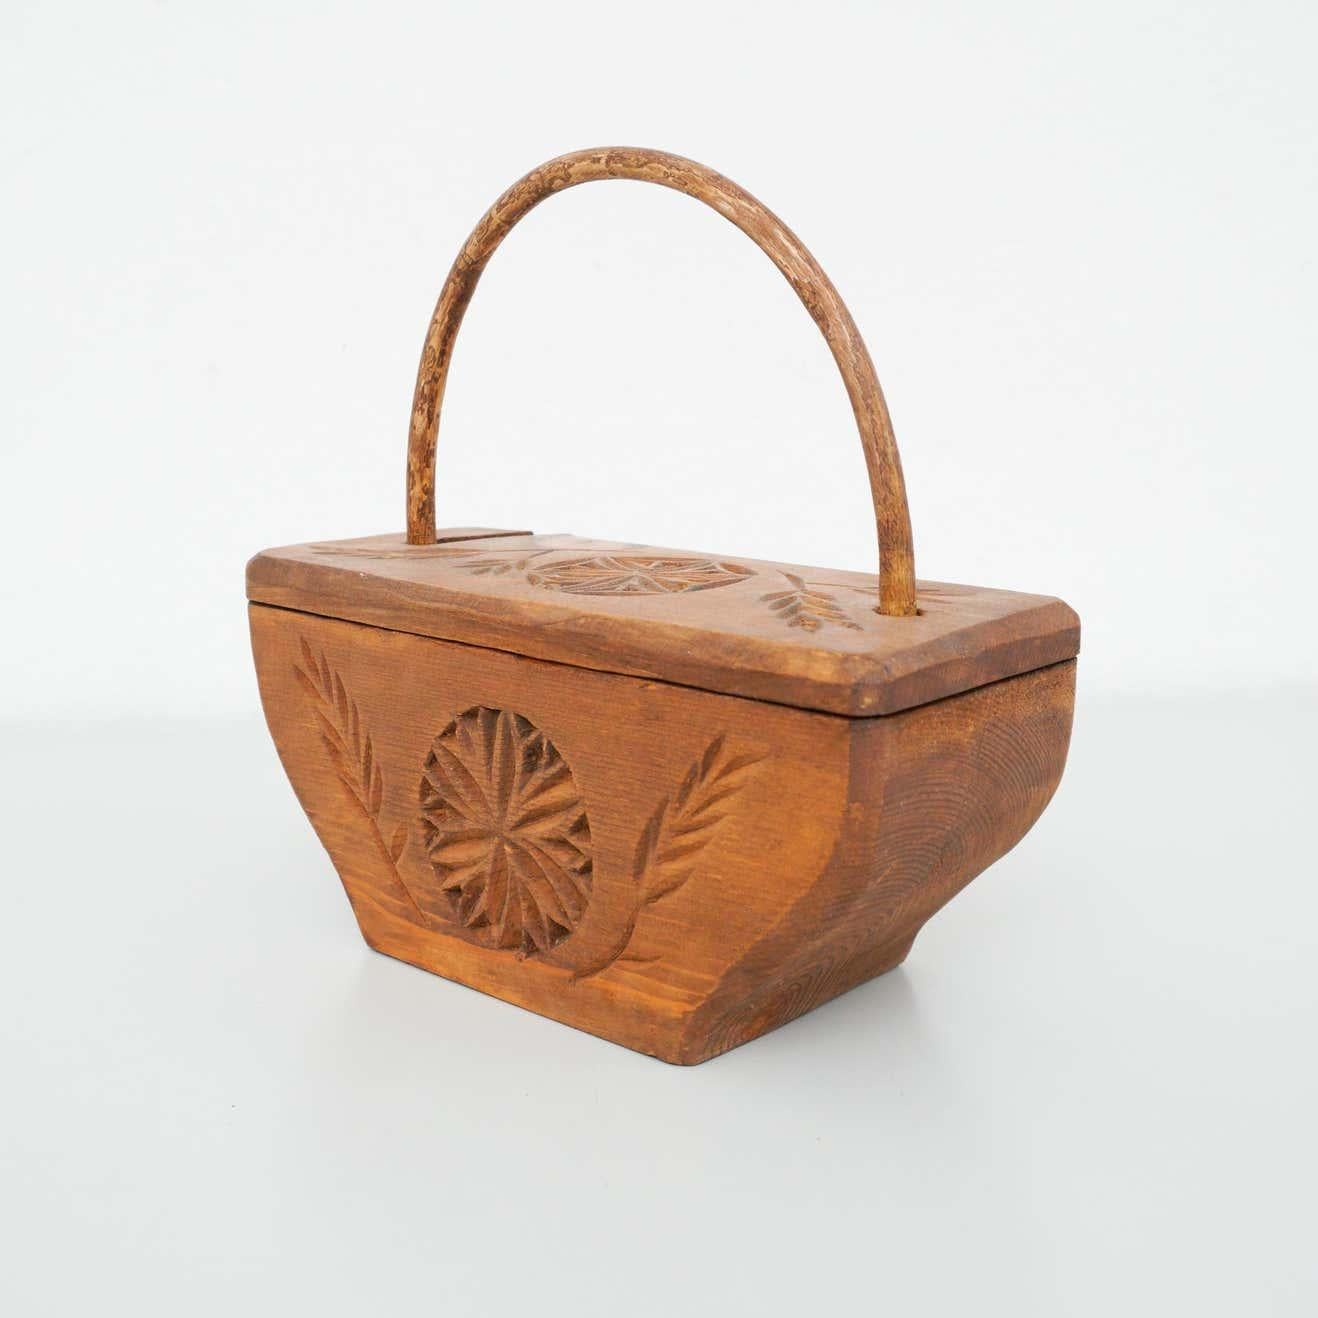 Mid-20th Century Rustic Primitive Wood Hand Carved Basket, circa 1950 For Sale